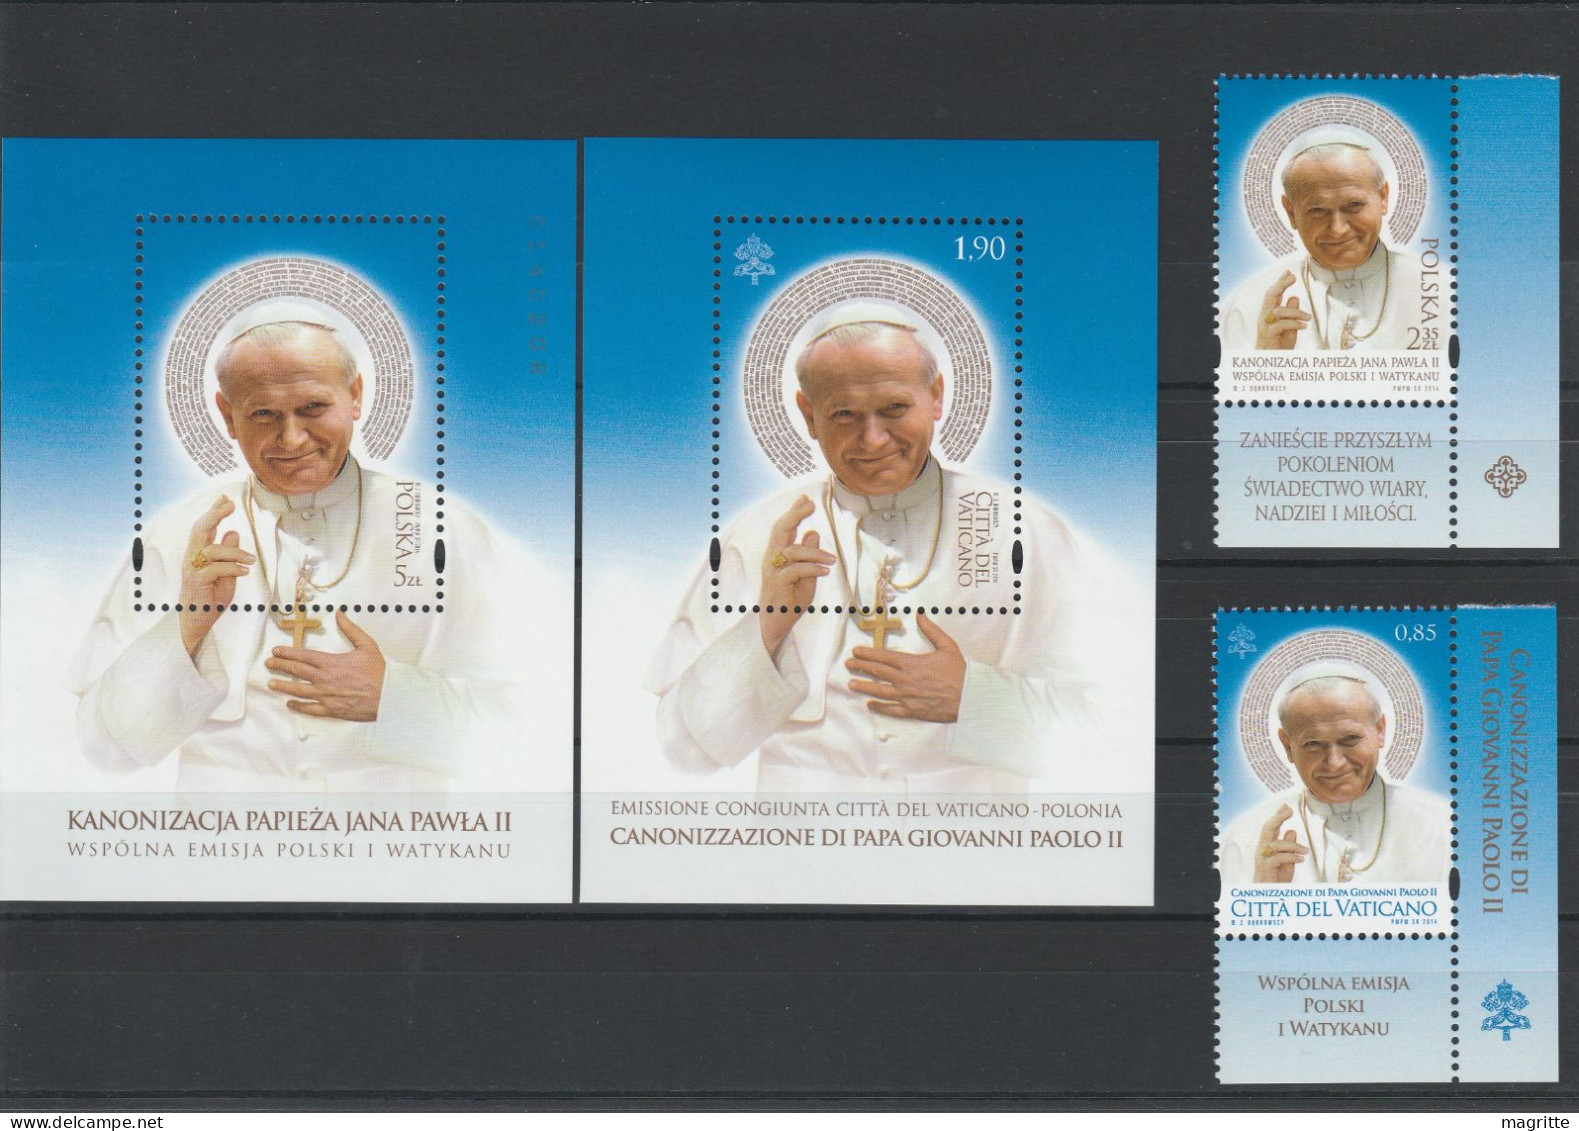 Pologne Vatican 2014 Emission Commune Canonisation Pape Jean Paul II Pope Poland Joint Issue John Paul II - Emissions Communes